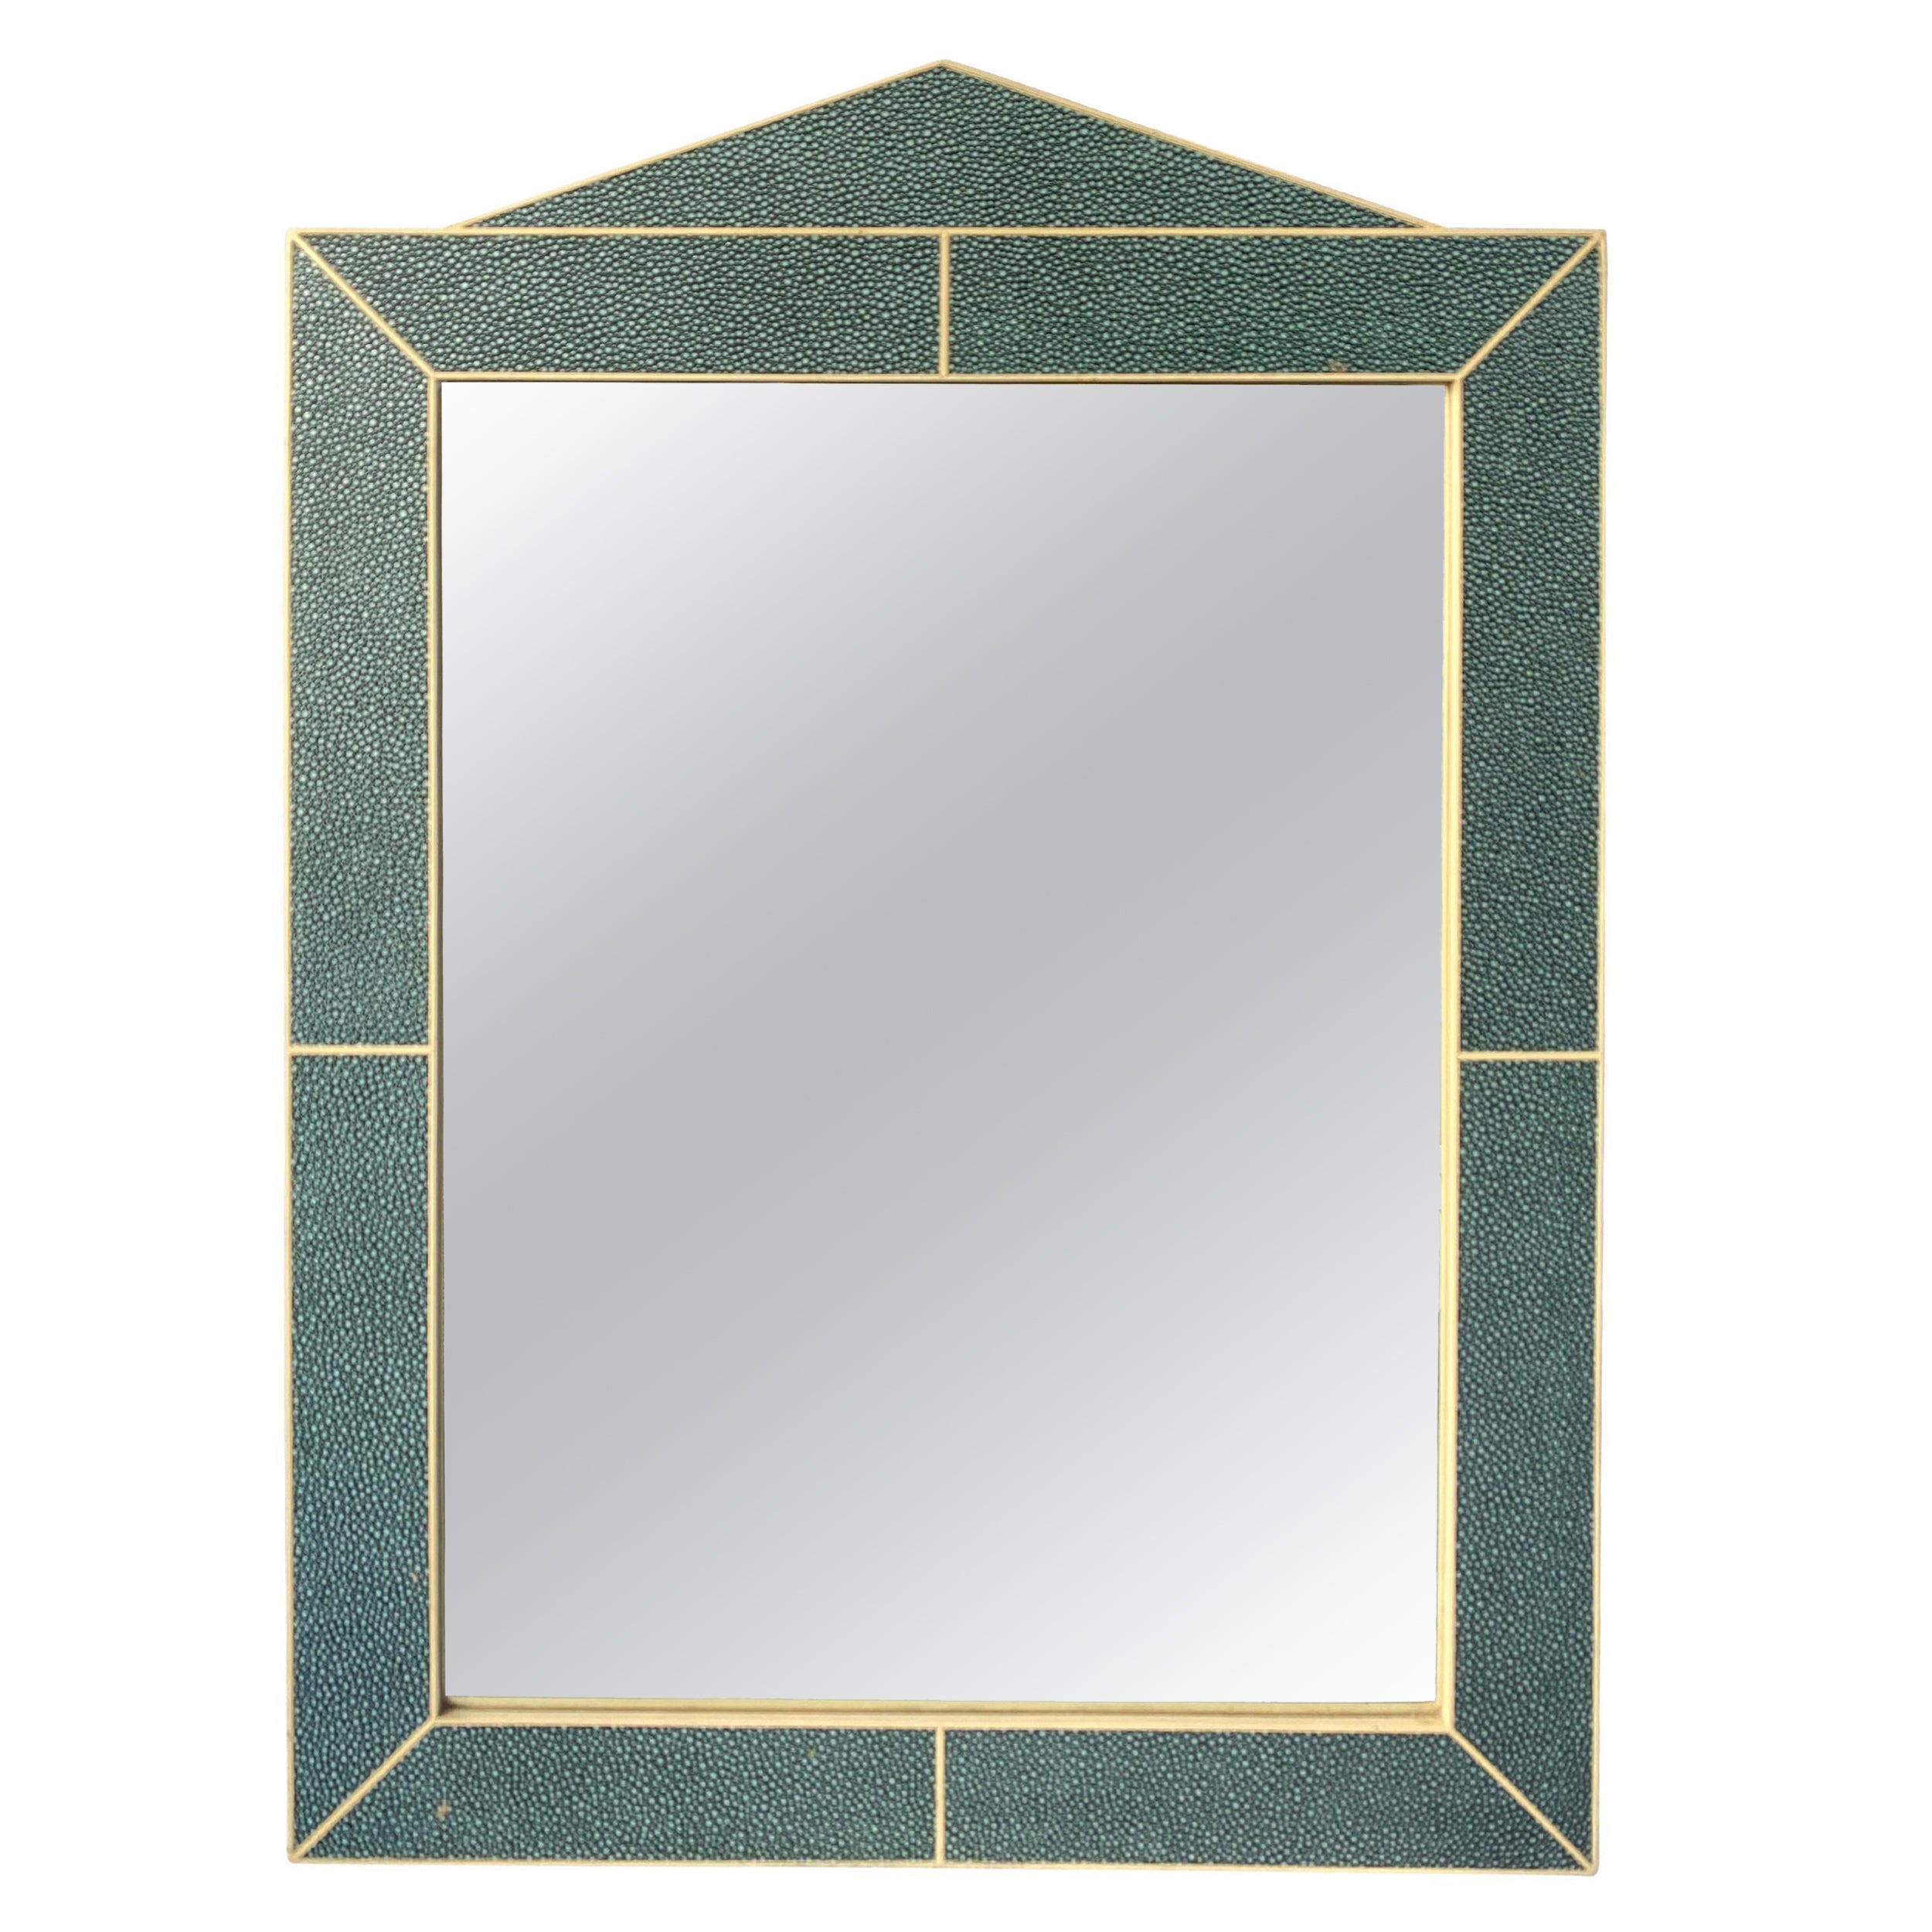 Vintage Shagreen Table Mirror from London